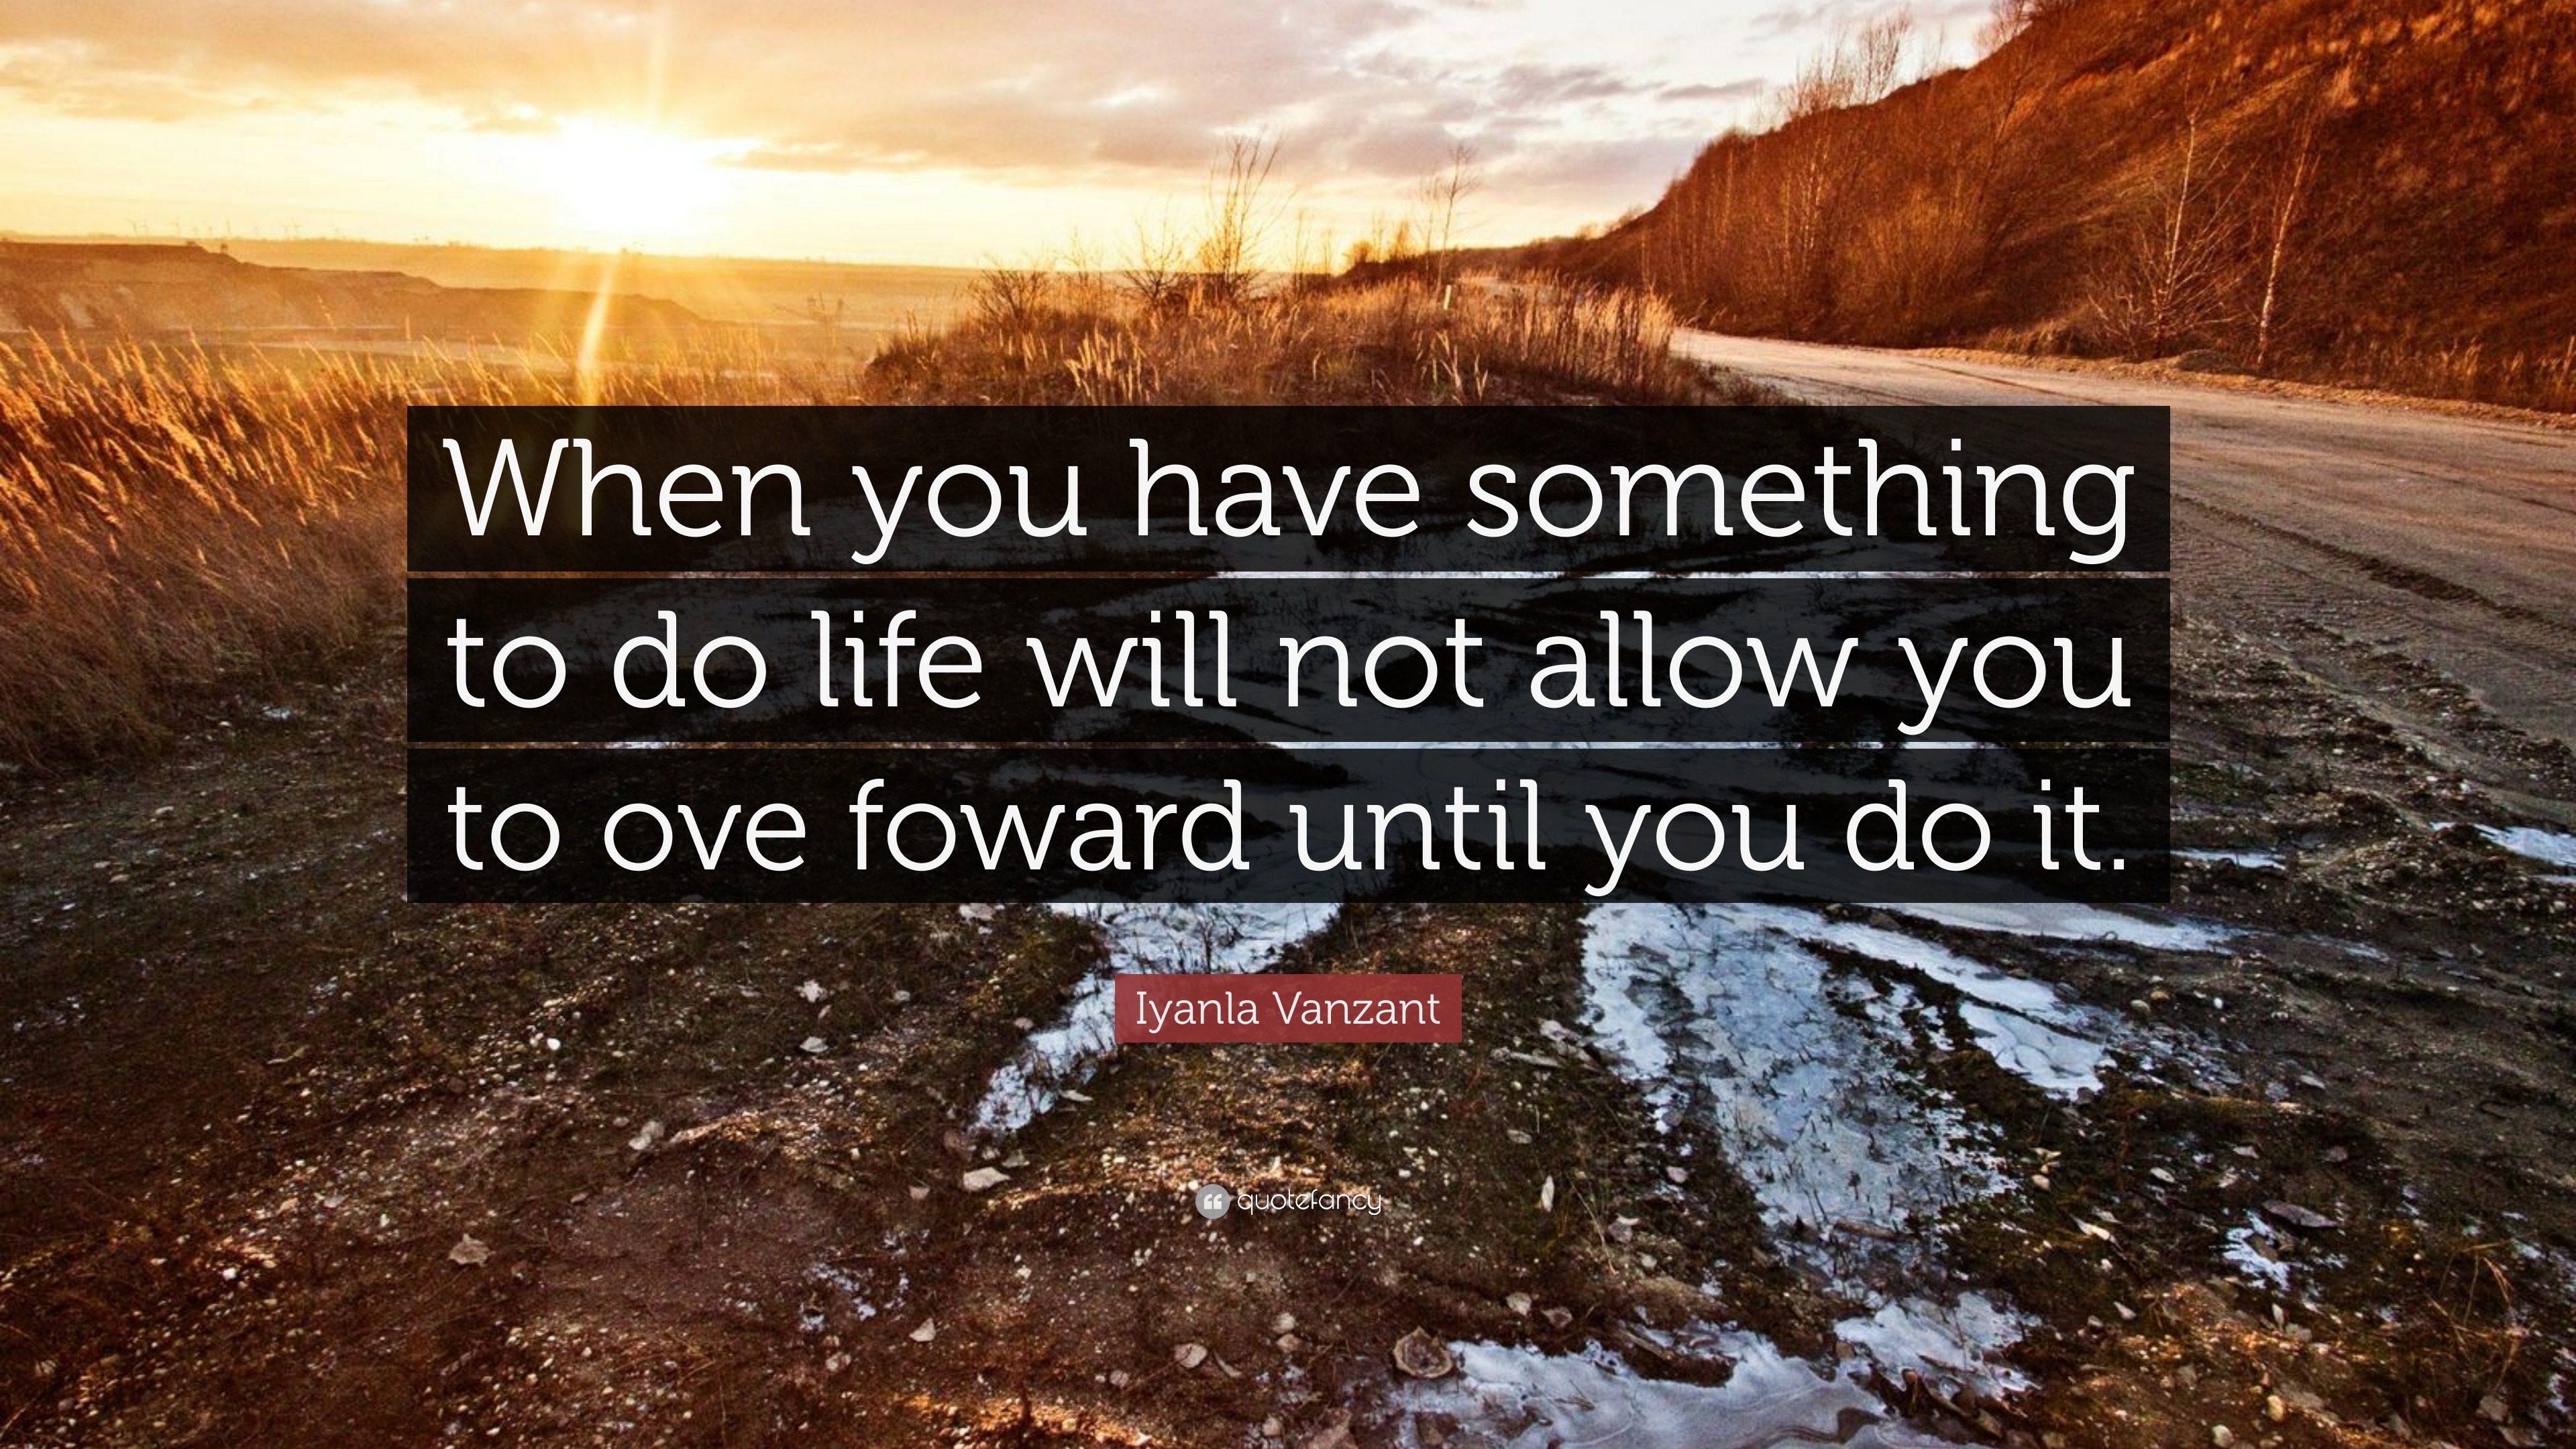 Iyanla Vanzant Quote: “When you have something to do life will not ...